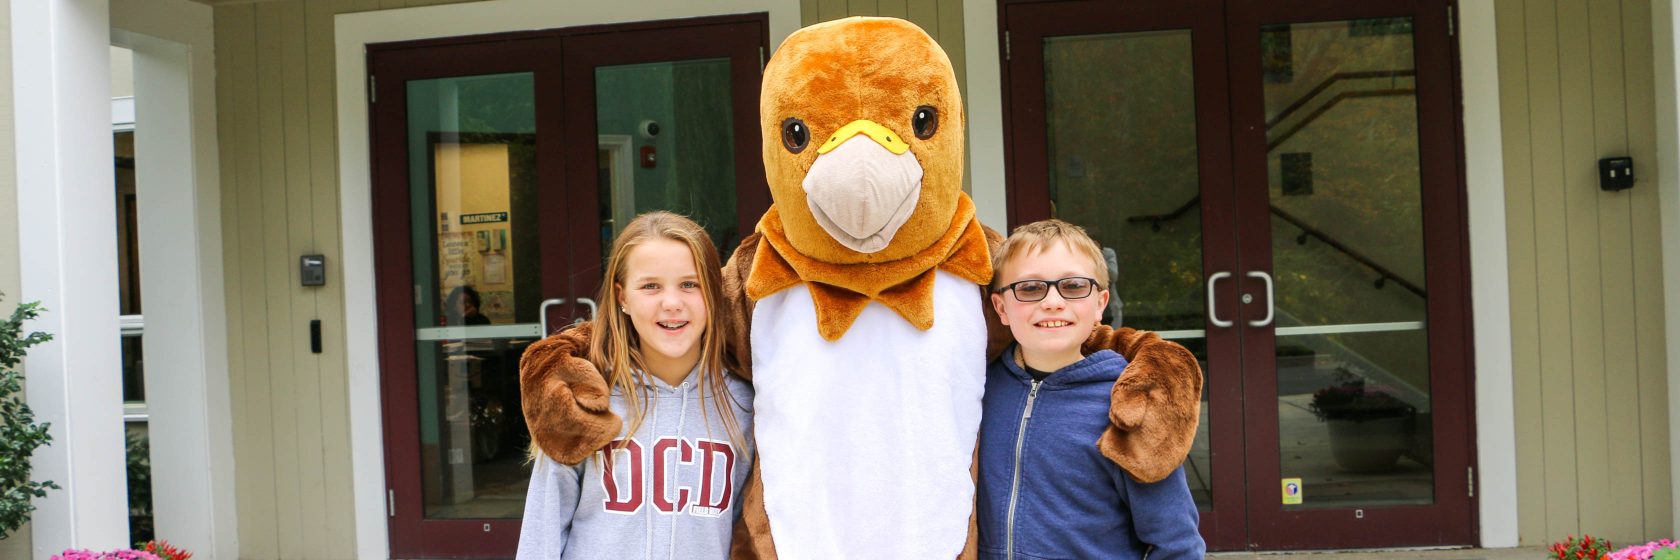 Hawk scholarship recipients posing with the hawk mascot in front of the school.